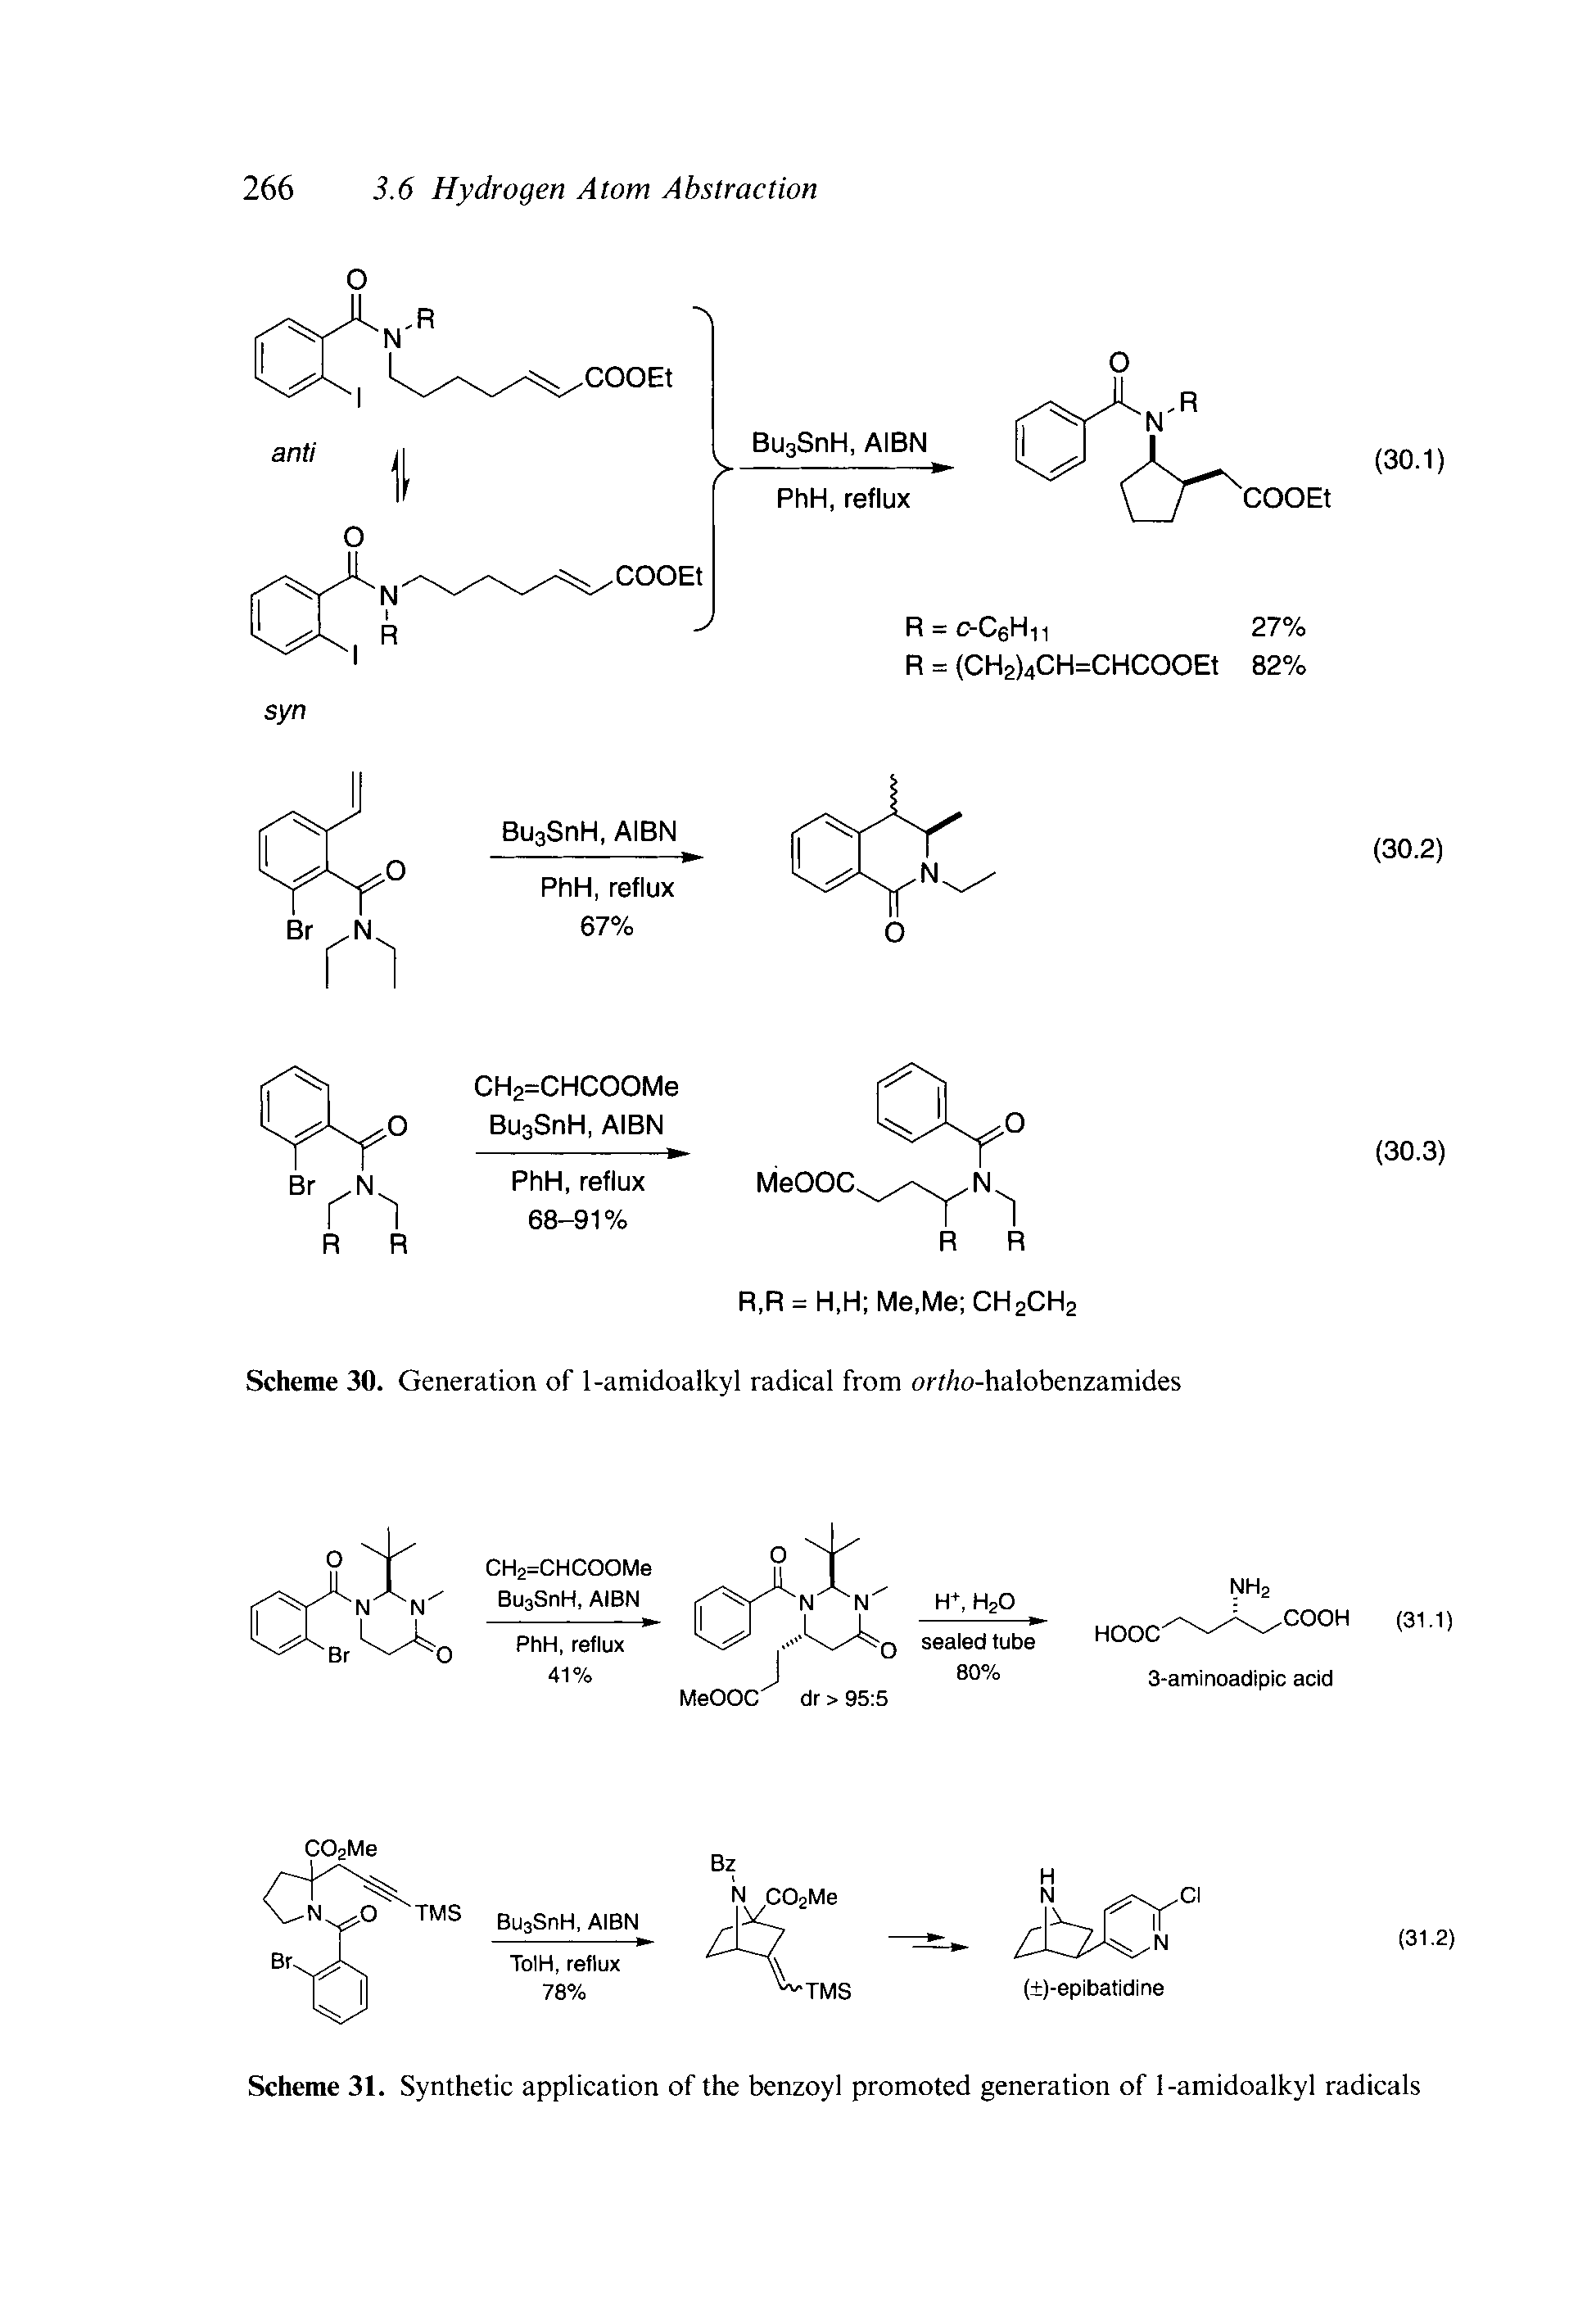 Scheme 31. Synthetic application of the benzoyl promoted generation of 1-amidoalkyl radicals...